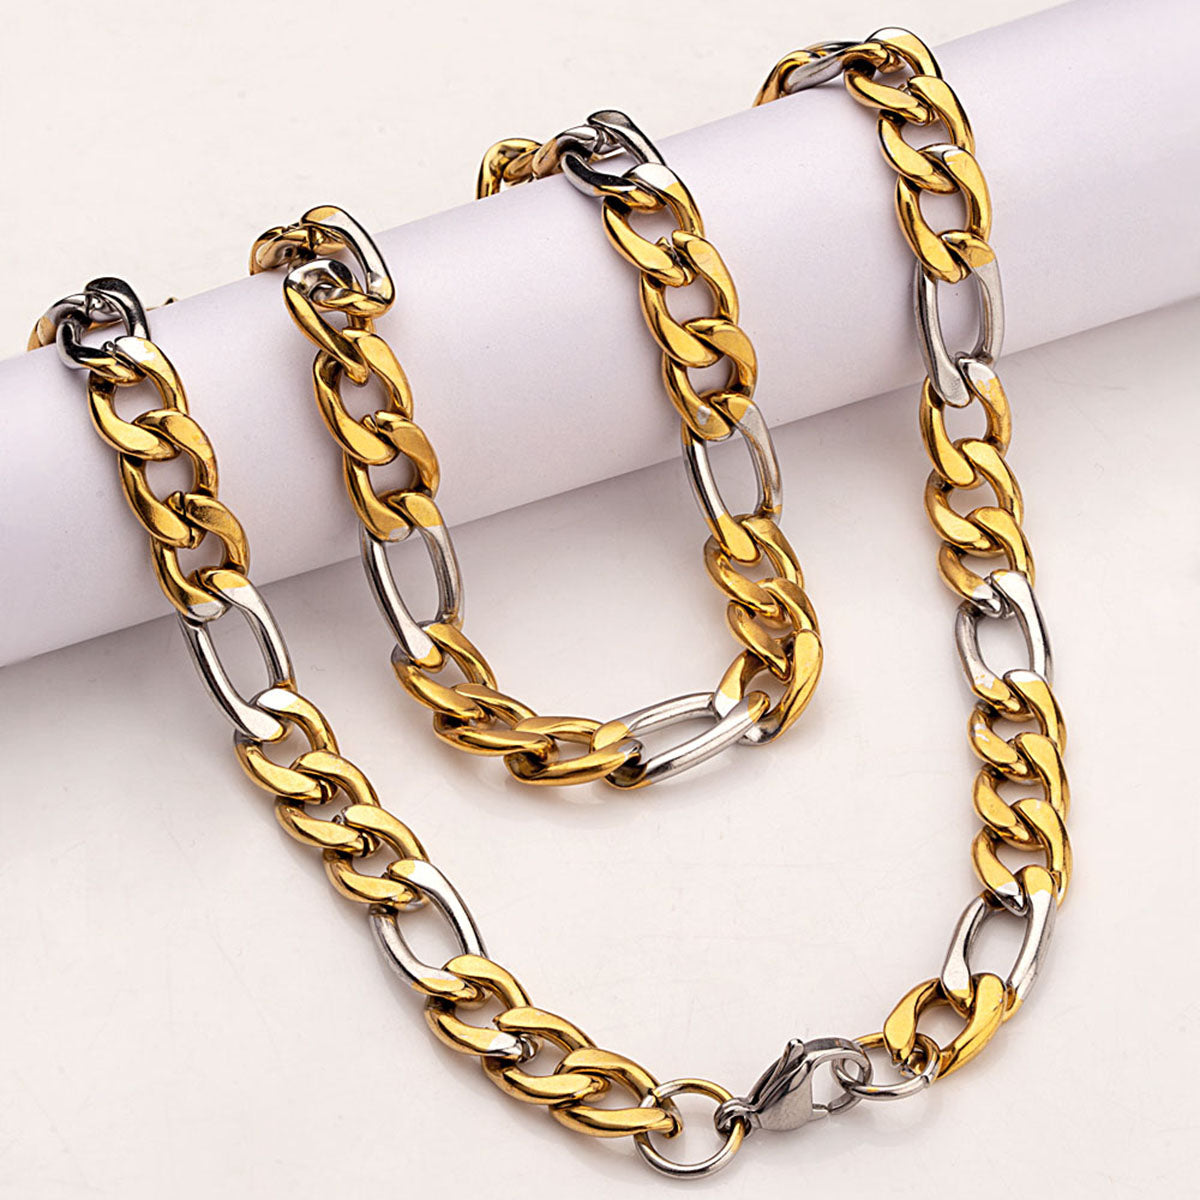 Royal Links Anchor Pattern Chain